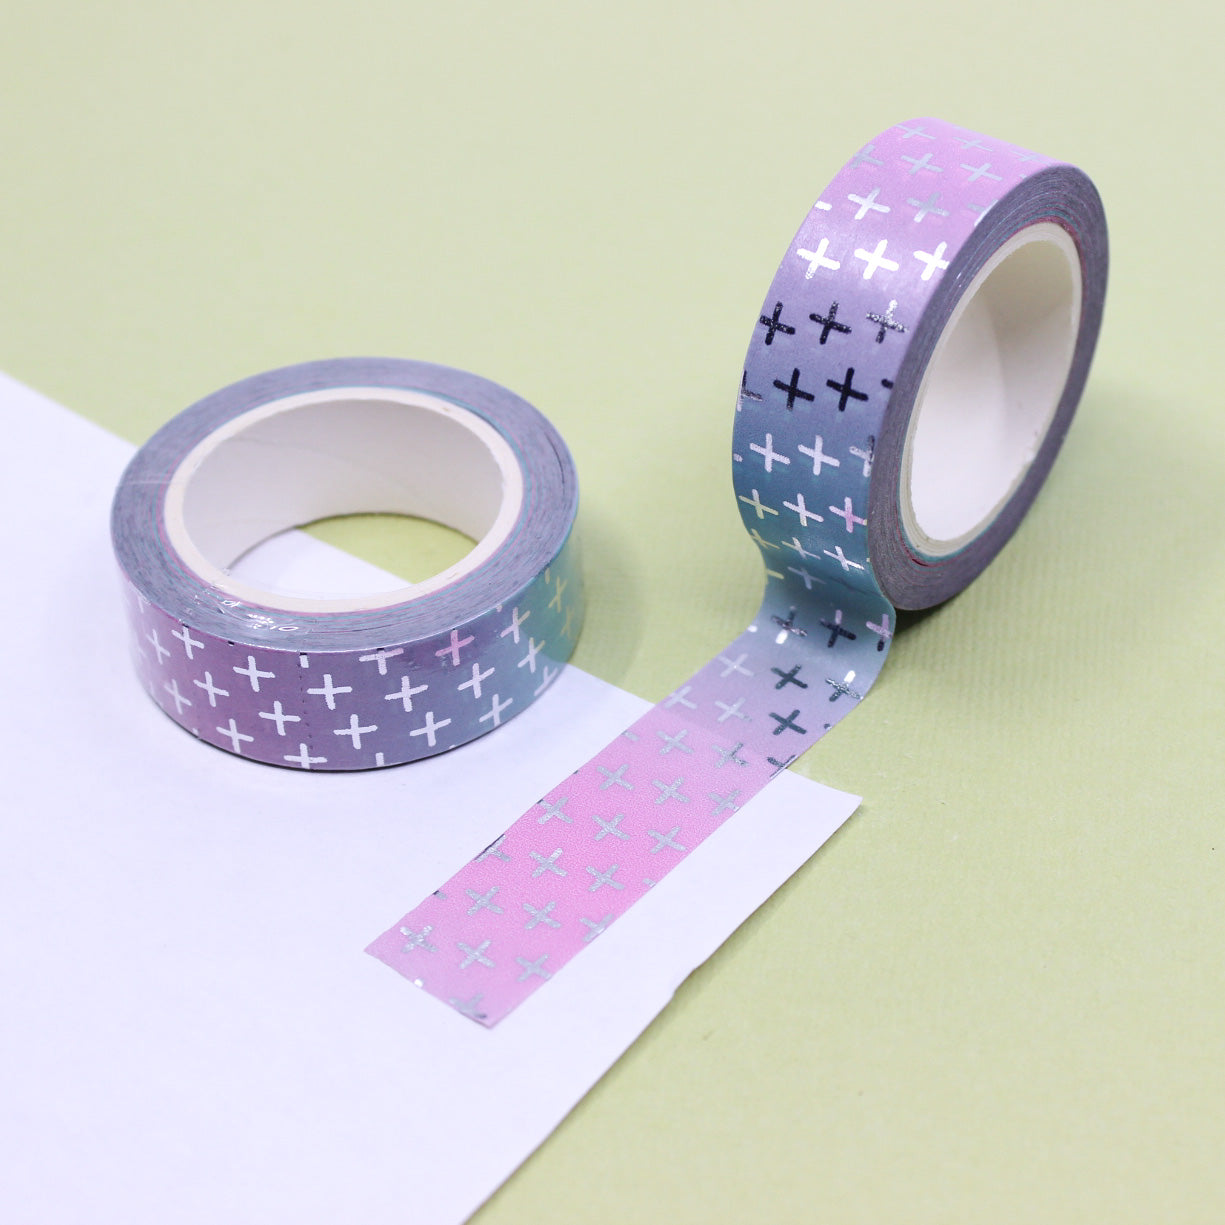 Elevate your faith-inspired projects with our Modern Silver Foil Cross Washi Tape, featuring a stylish cross design in shimmering silver foil. Ideal for adding a touch of elegance to your religious crafts. This tape is sold at BBB Supplies Craft Shop.